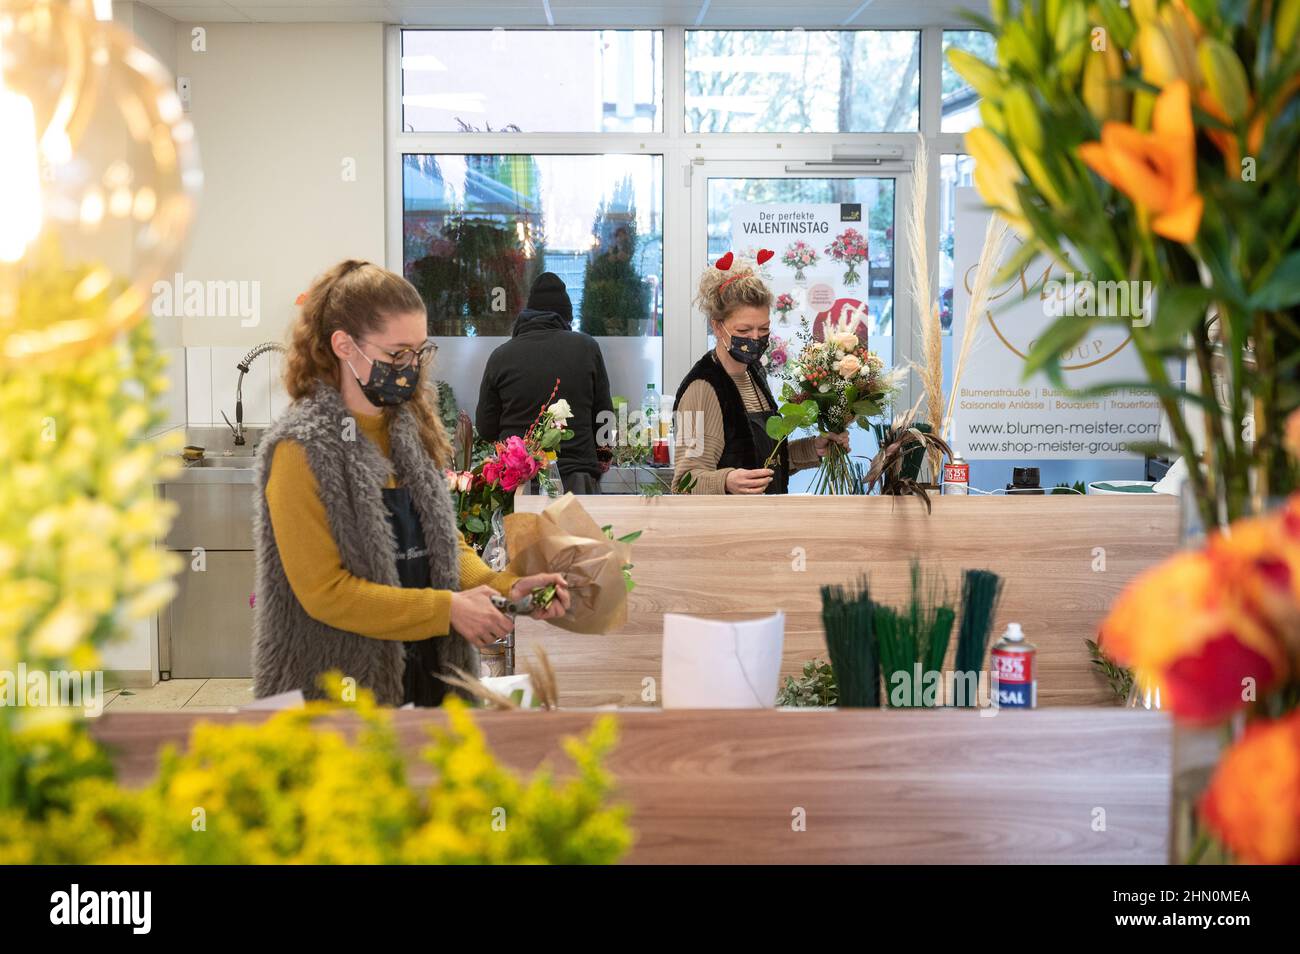 13 February 2022, Hessen, Frankfurt/Main: Florists work in the flower store  "Alice im Blumenland", which belongs to the Frankfurt flower store "Blumen  Meister". February 14 is Valentine's Day and thus one of